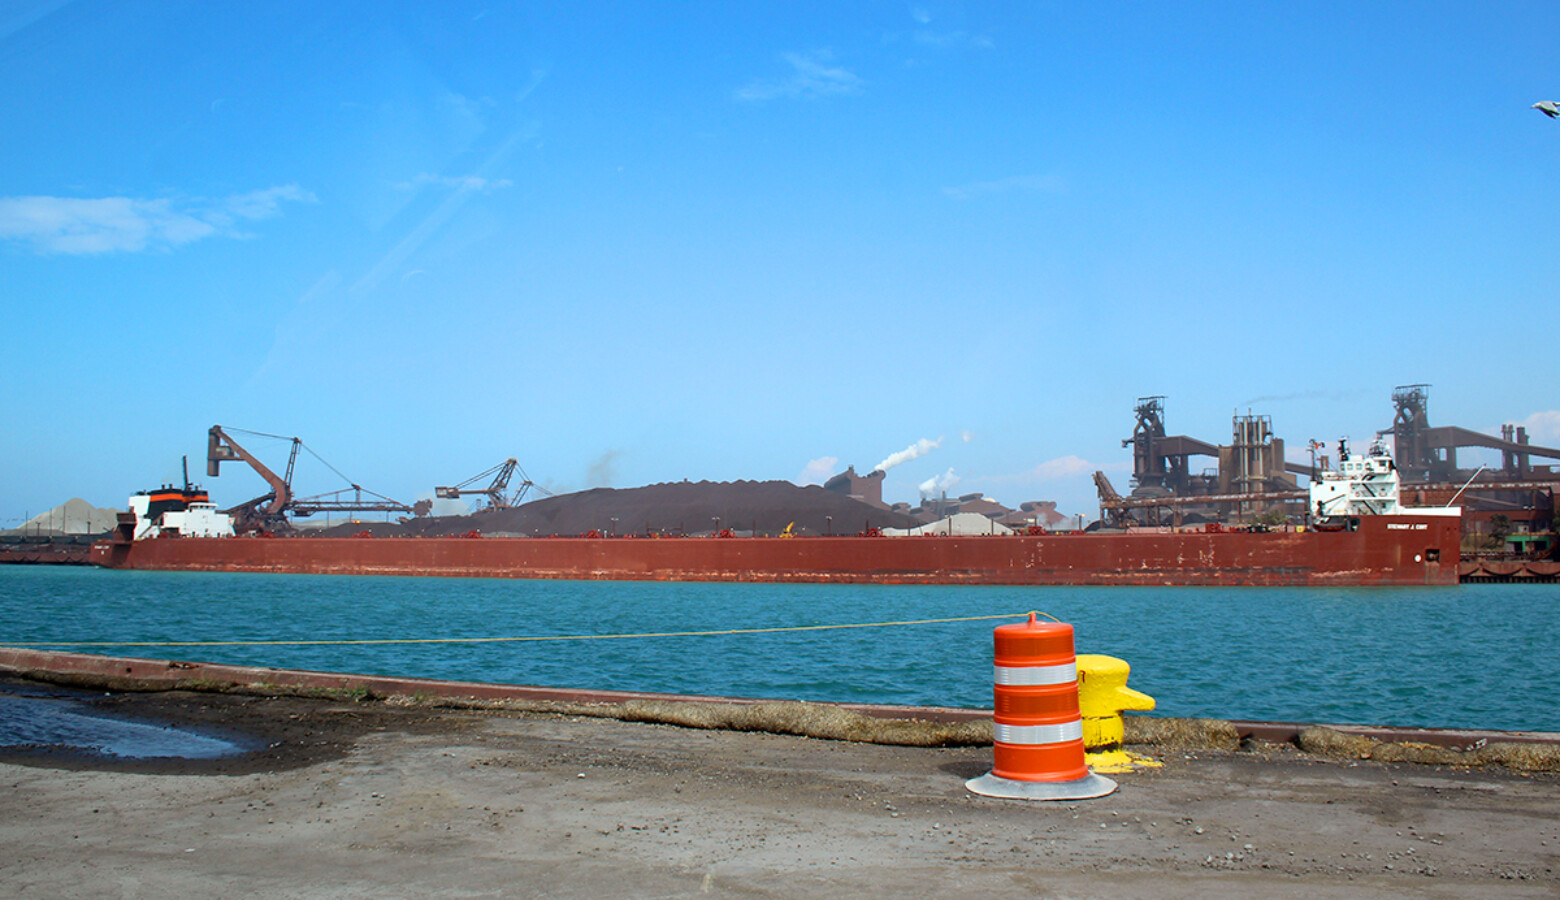 A semi-automated “laker” ship, the Stewart Cort, offloads iron ore at the steel-maker ArcelorMittal across from the Port of Indiana-Burns Harbor. (FILE PHOTO: Annie Ropeik/IPB News)